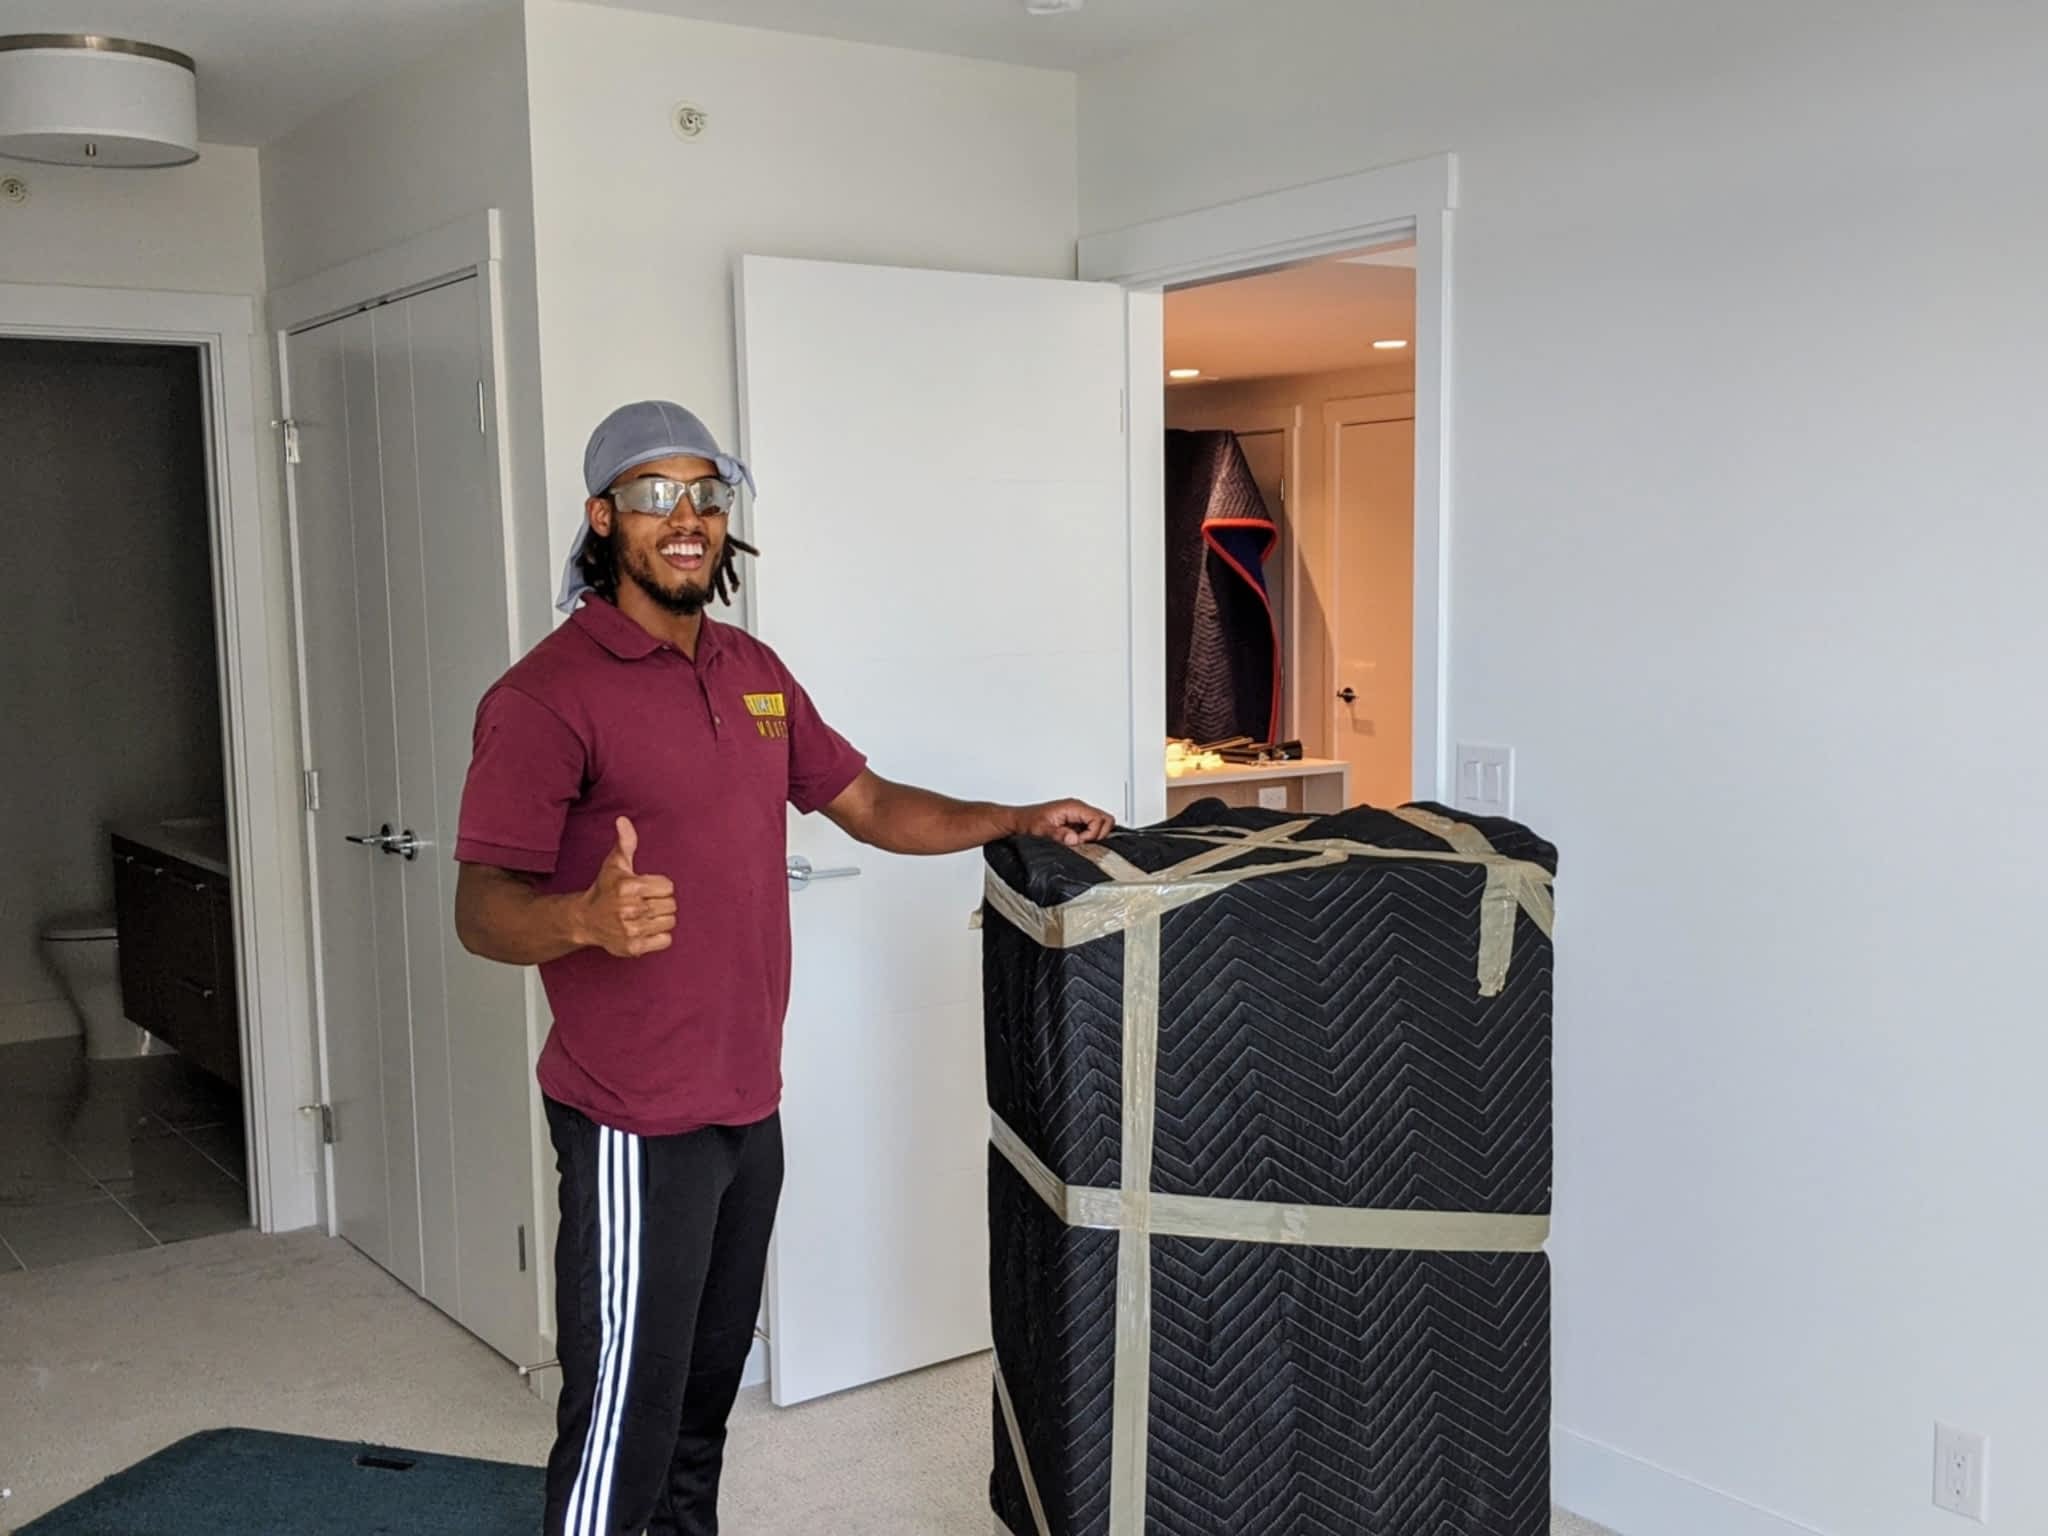 photo Simple Moves & Storage Movers Burnaby